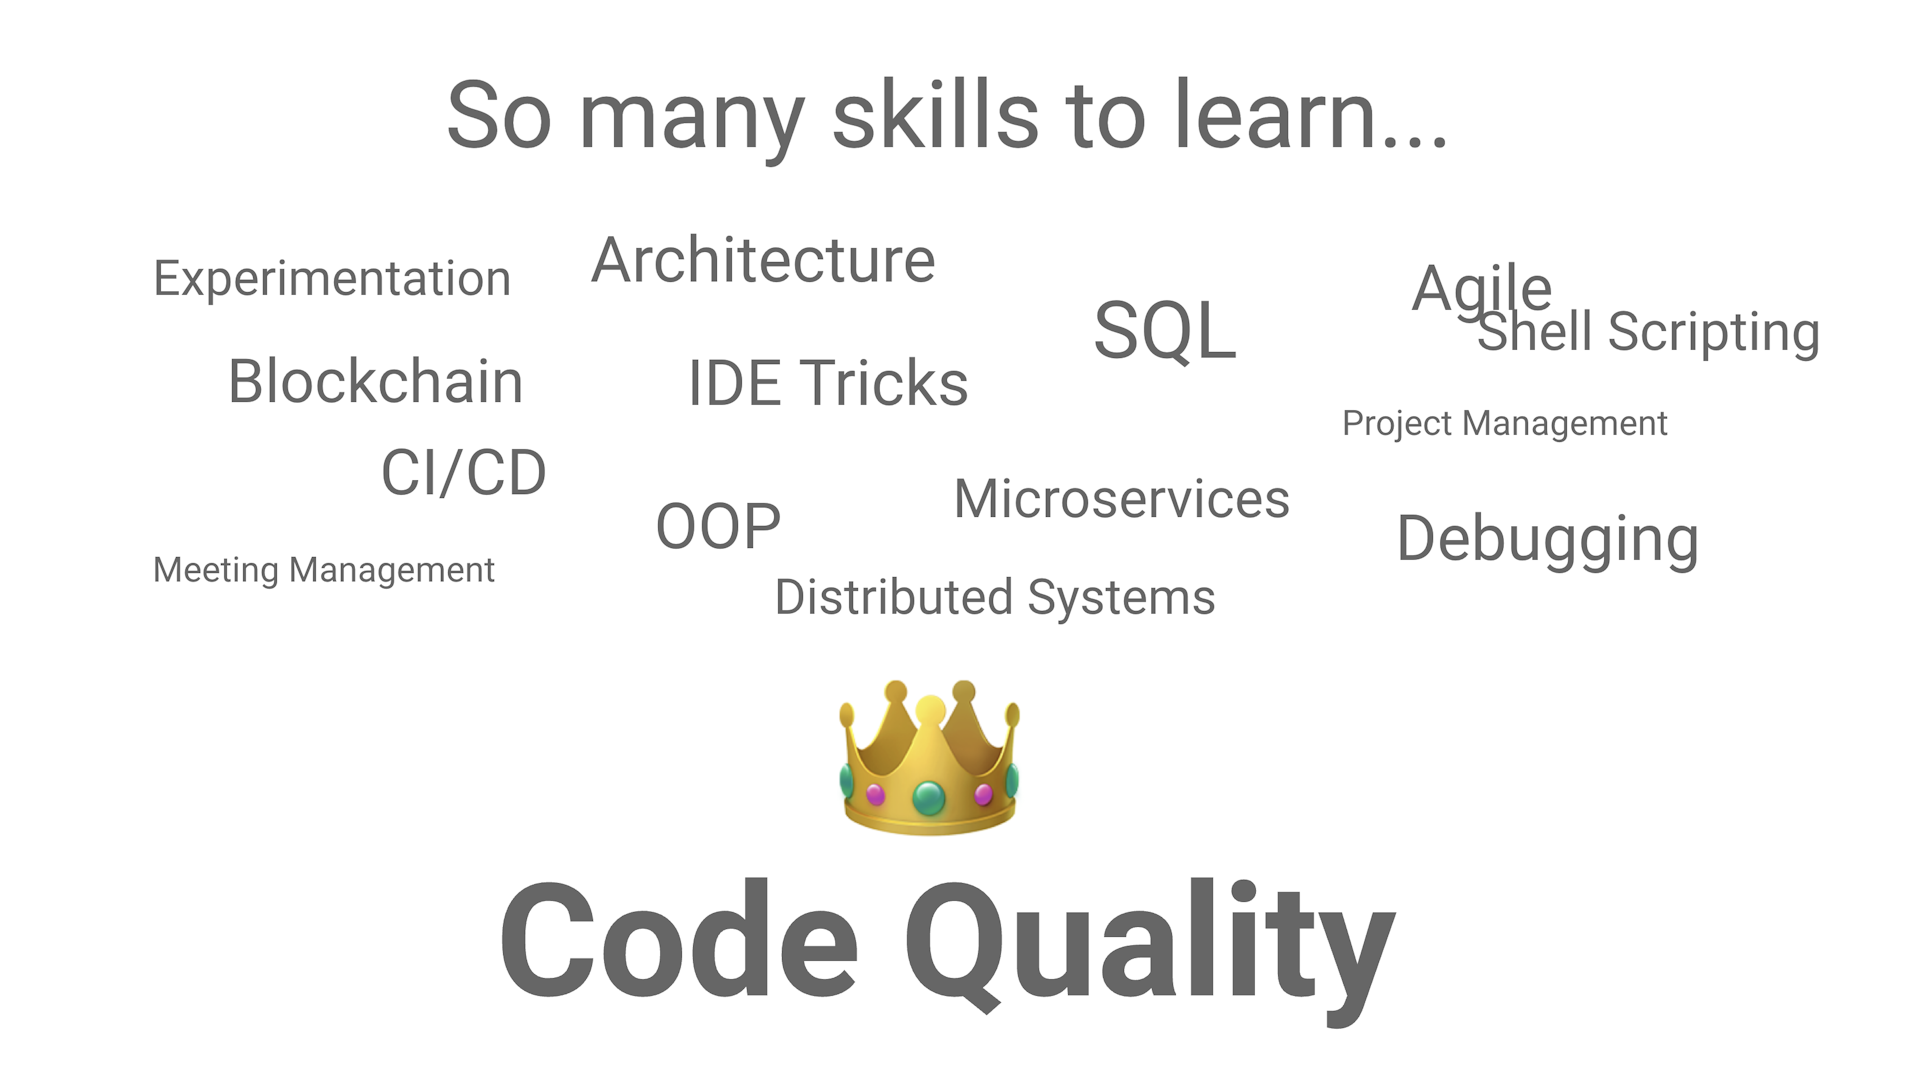 Level Up Your Code Quality As A Software Engineer [Part 1] - How This Course Works